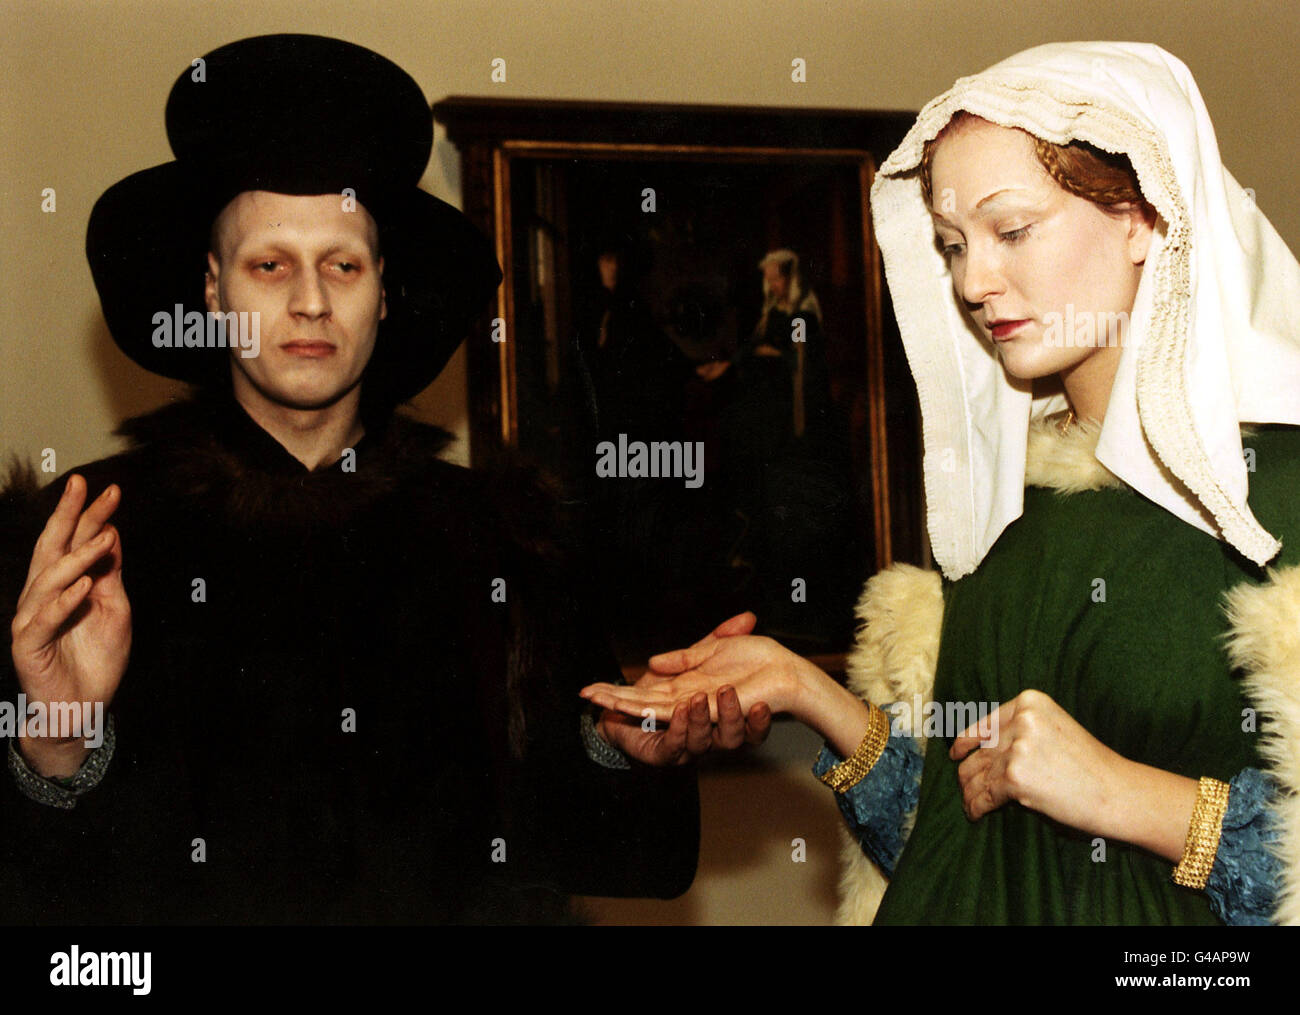 PA NEWS PHOTO 09/01/98 DRESSED IN COSTUMES, TWO MODELS POSE IN A RECREATION OF A JAN VAN EYCK PAINTING DURING A SPECIAL ONE DAY EXHIBITION AT THE NATIONAL GALLERY IN LONDON. IT WAS A JOINT PROJECT BETWEEN THE WIMBLEDON SCHOOL OF ART AND THE NATIONAL GALLERY Stock Photo